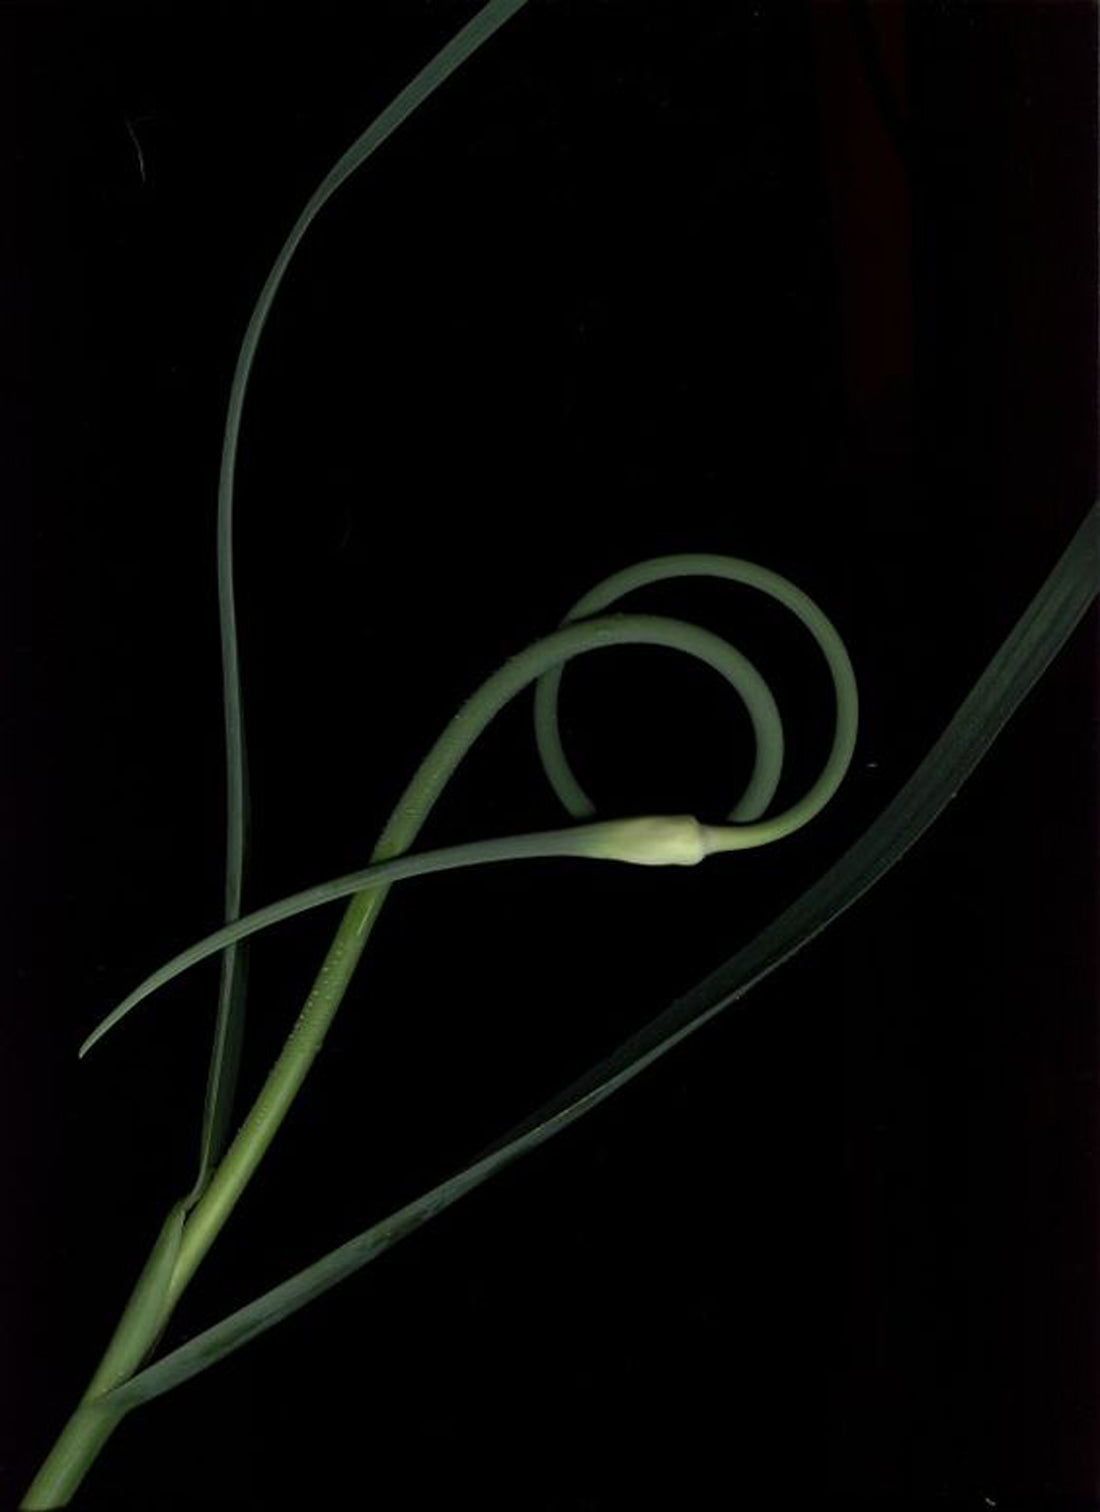 An orchid bud coiled tightly against a black background.